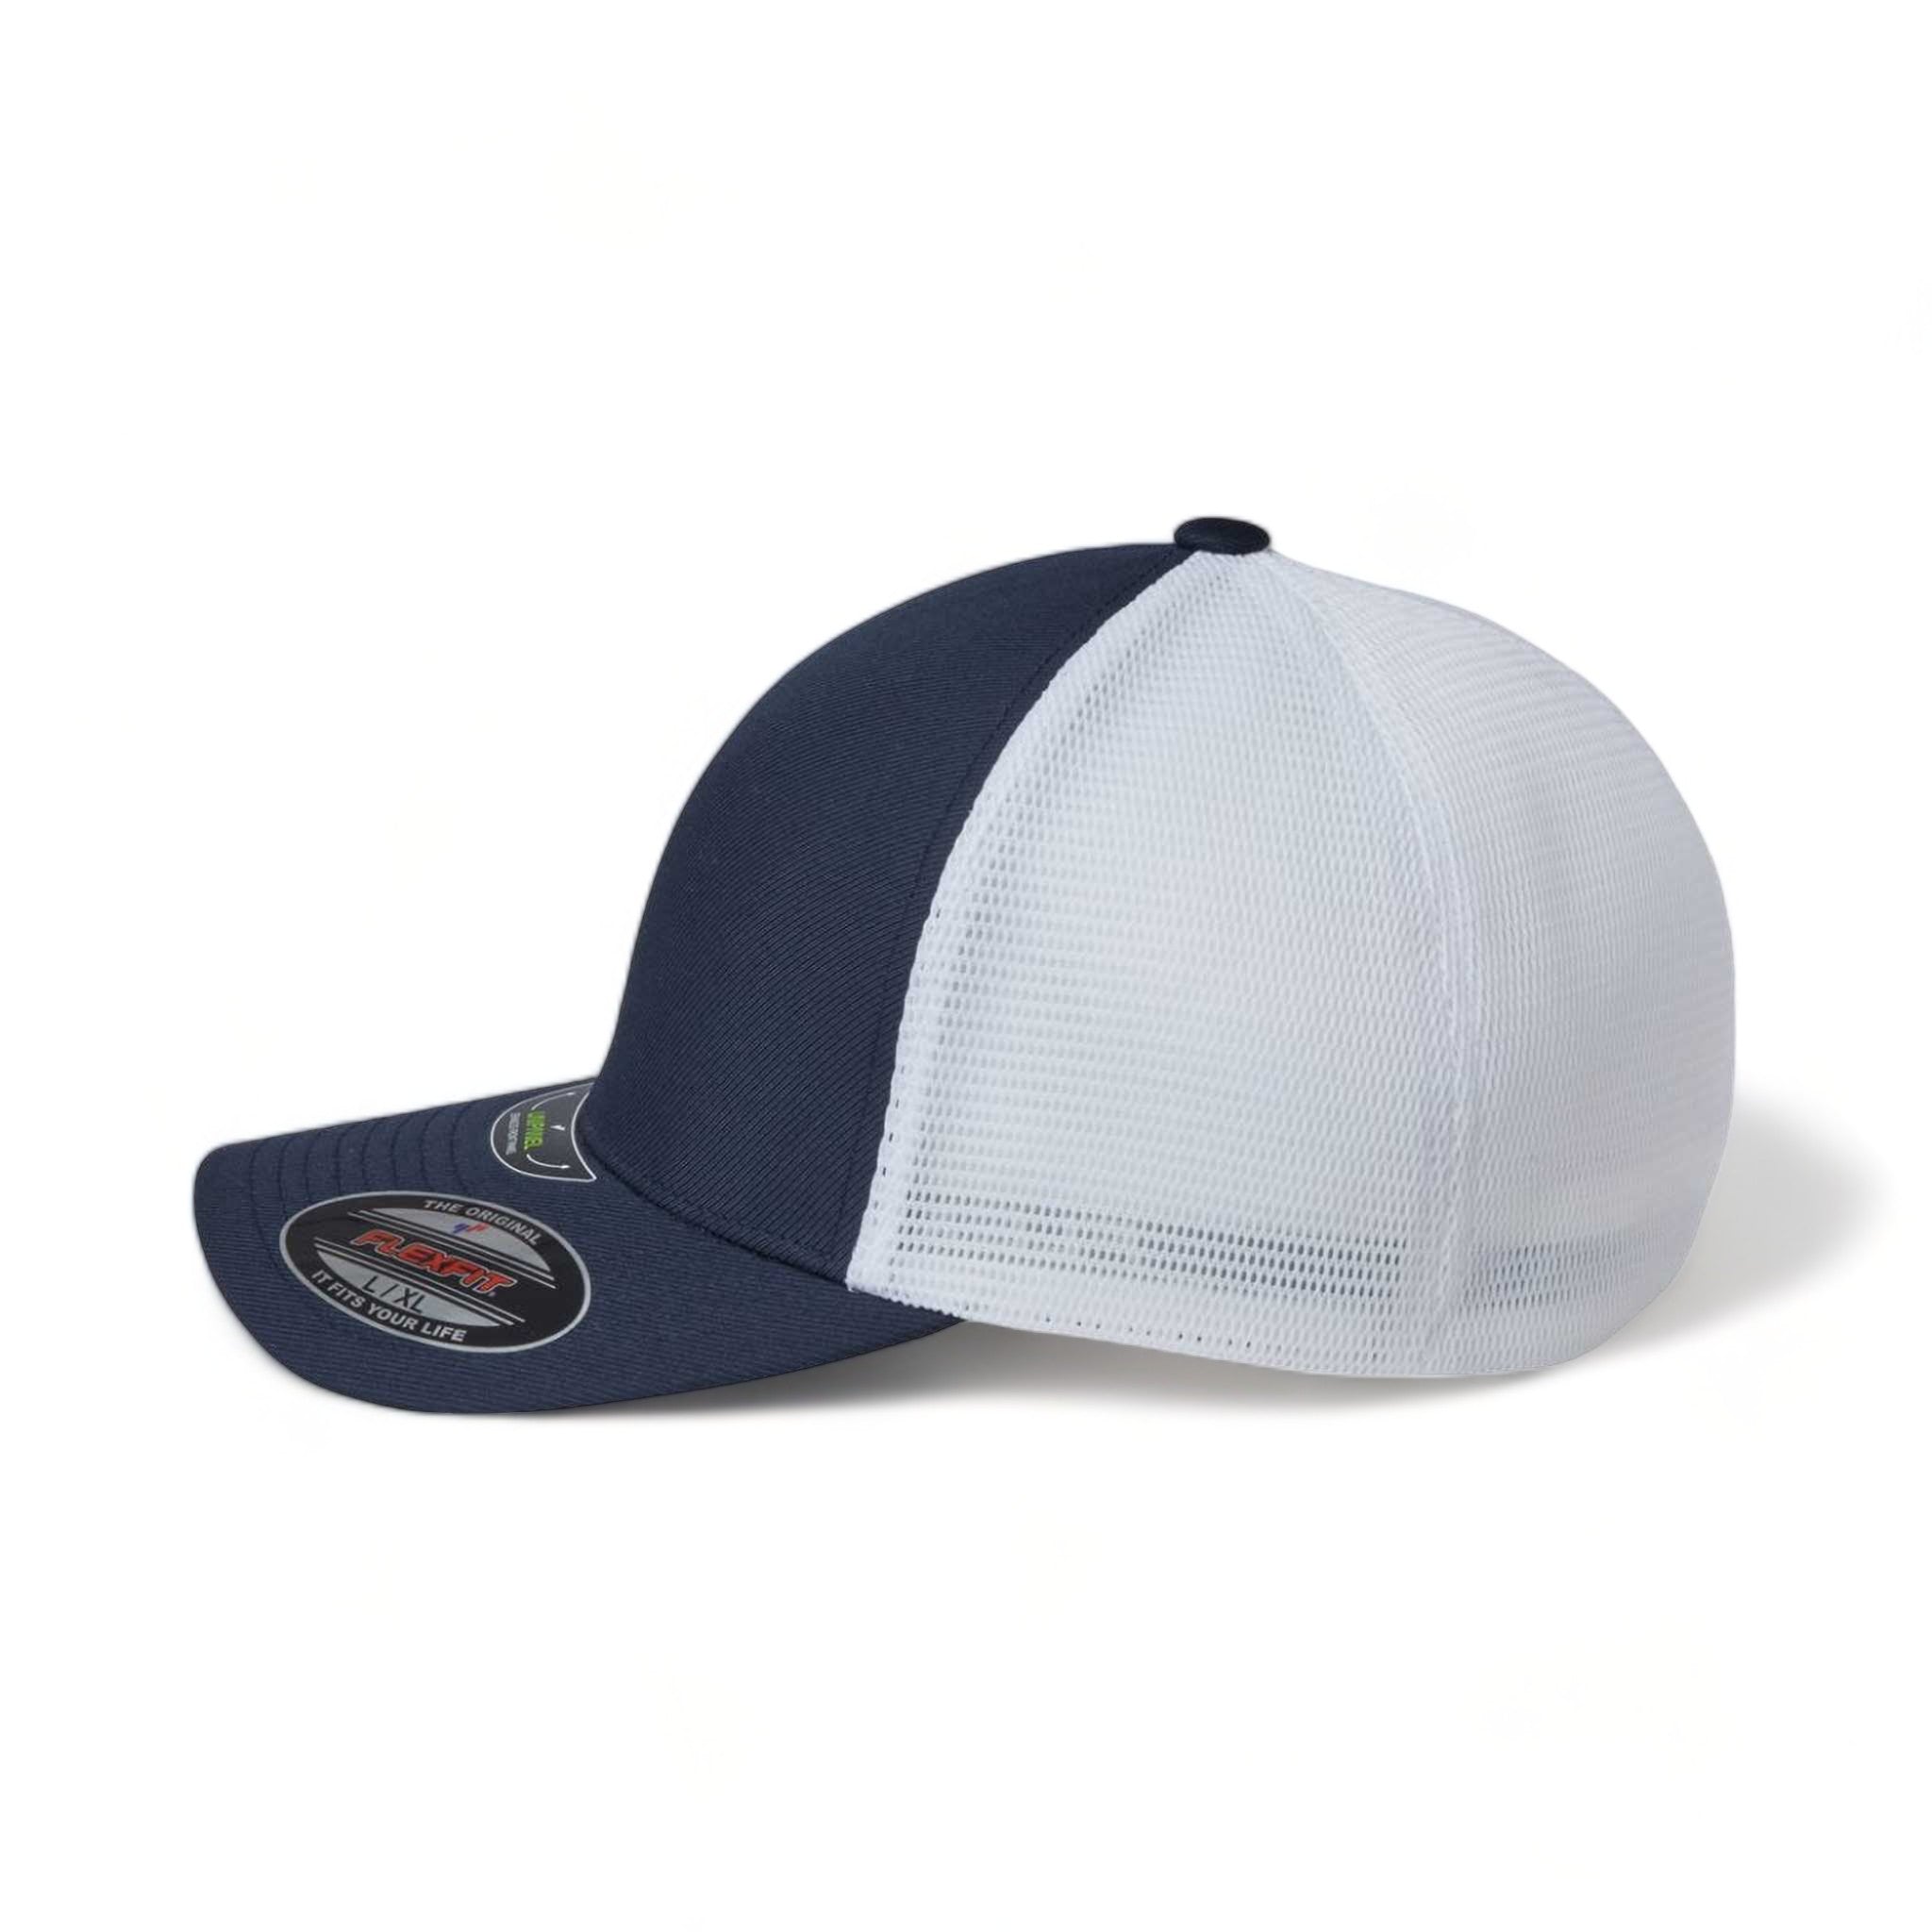 Side view of Flexfit 5511UP custom hat in true navy and white